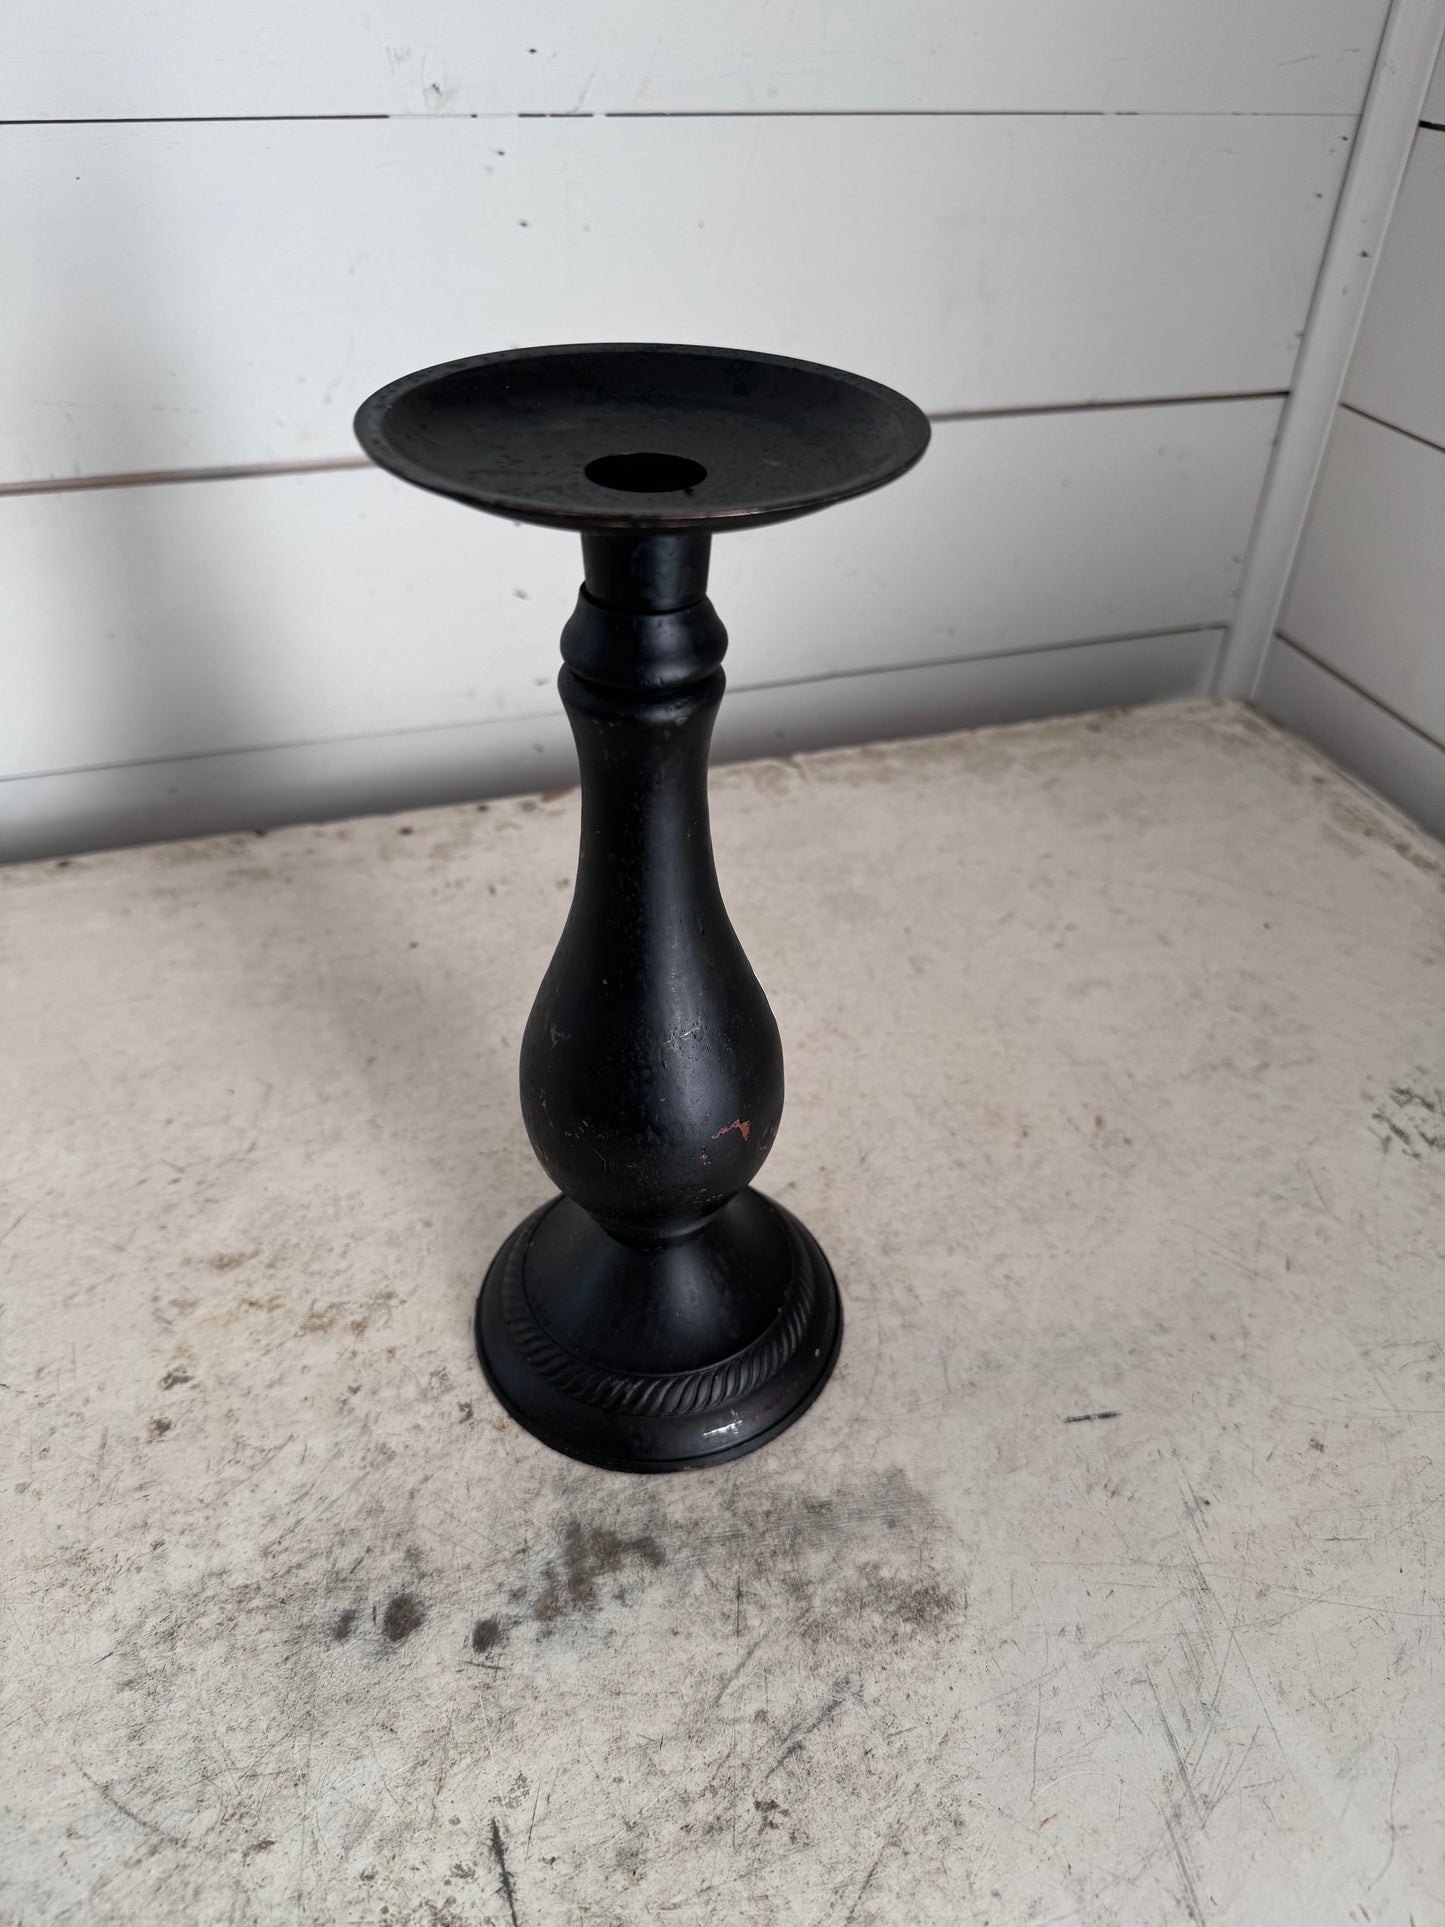 Metal and wood candlestick will be painted